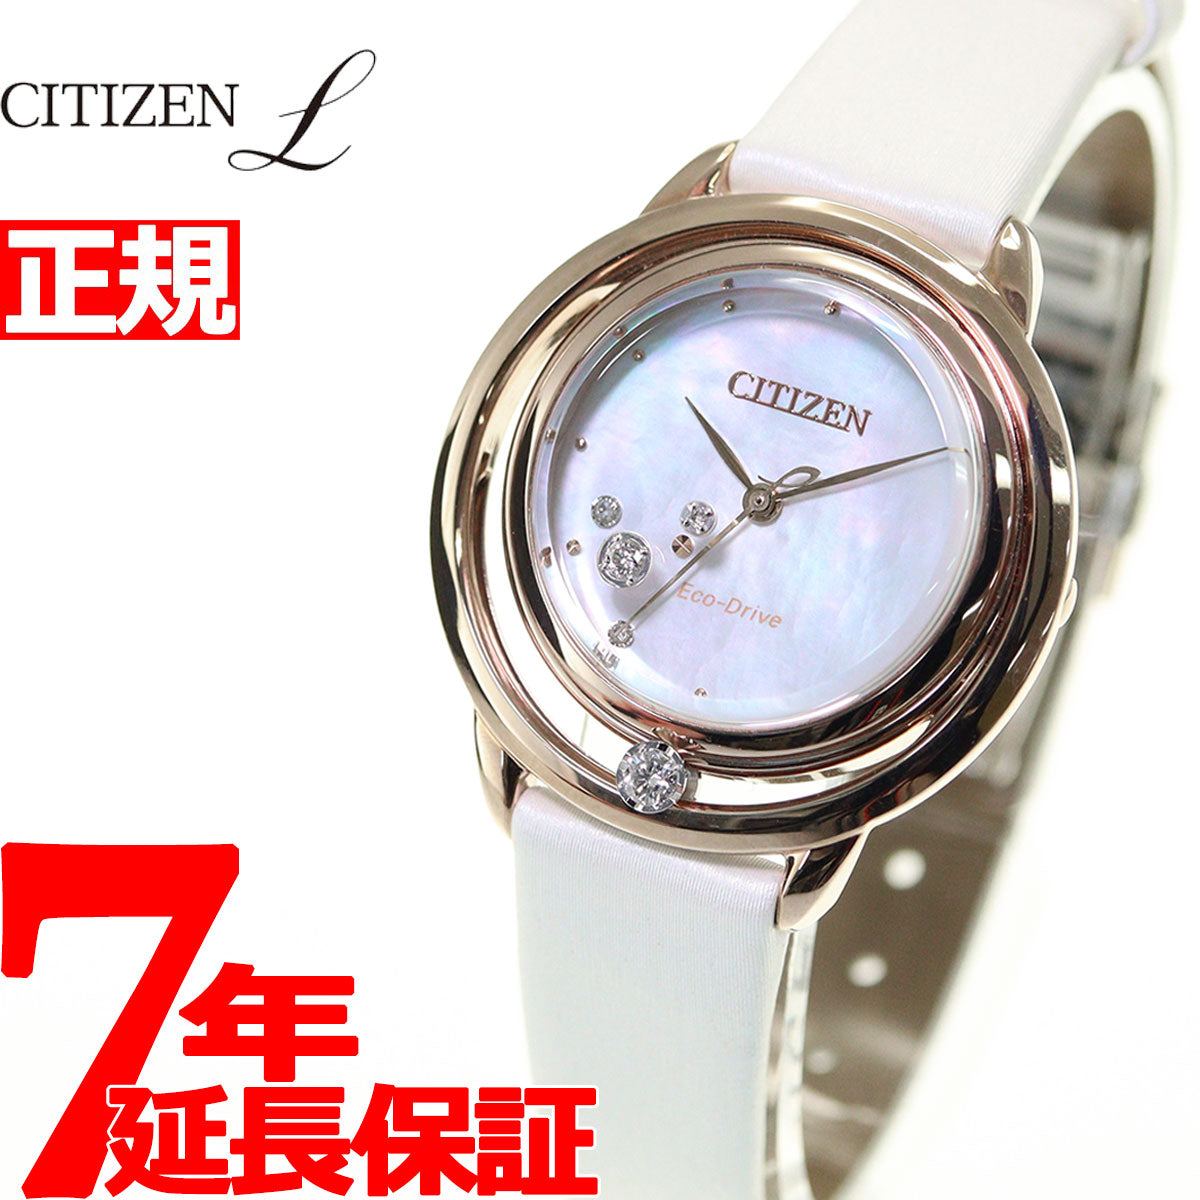 CITIZEN L CITIZEN L シチズン シチズン エル Arcly Collection 限定